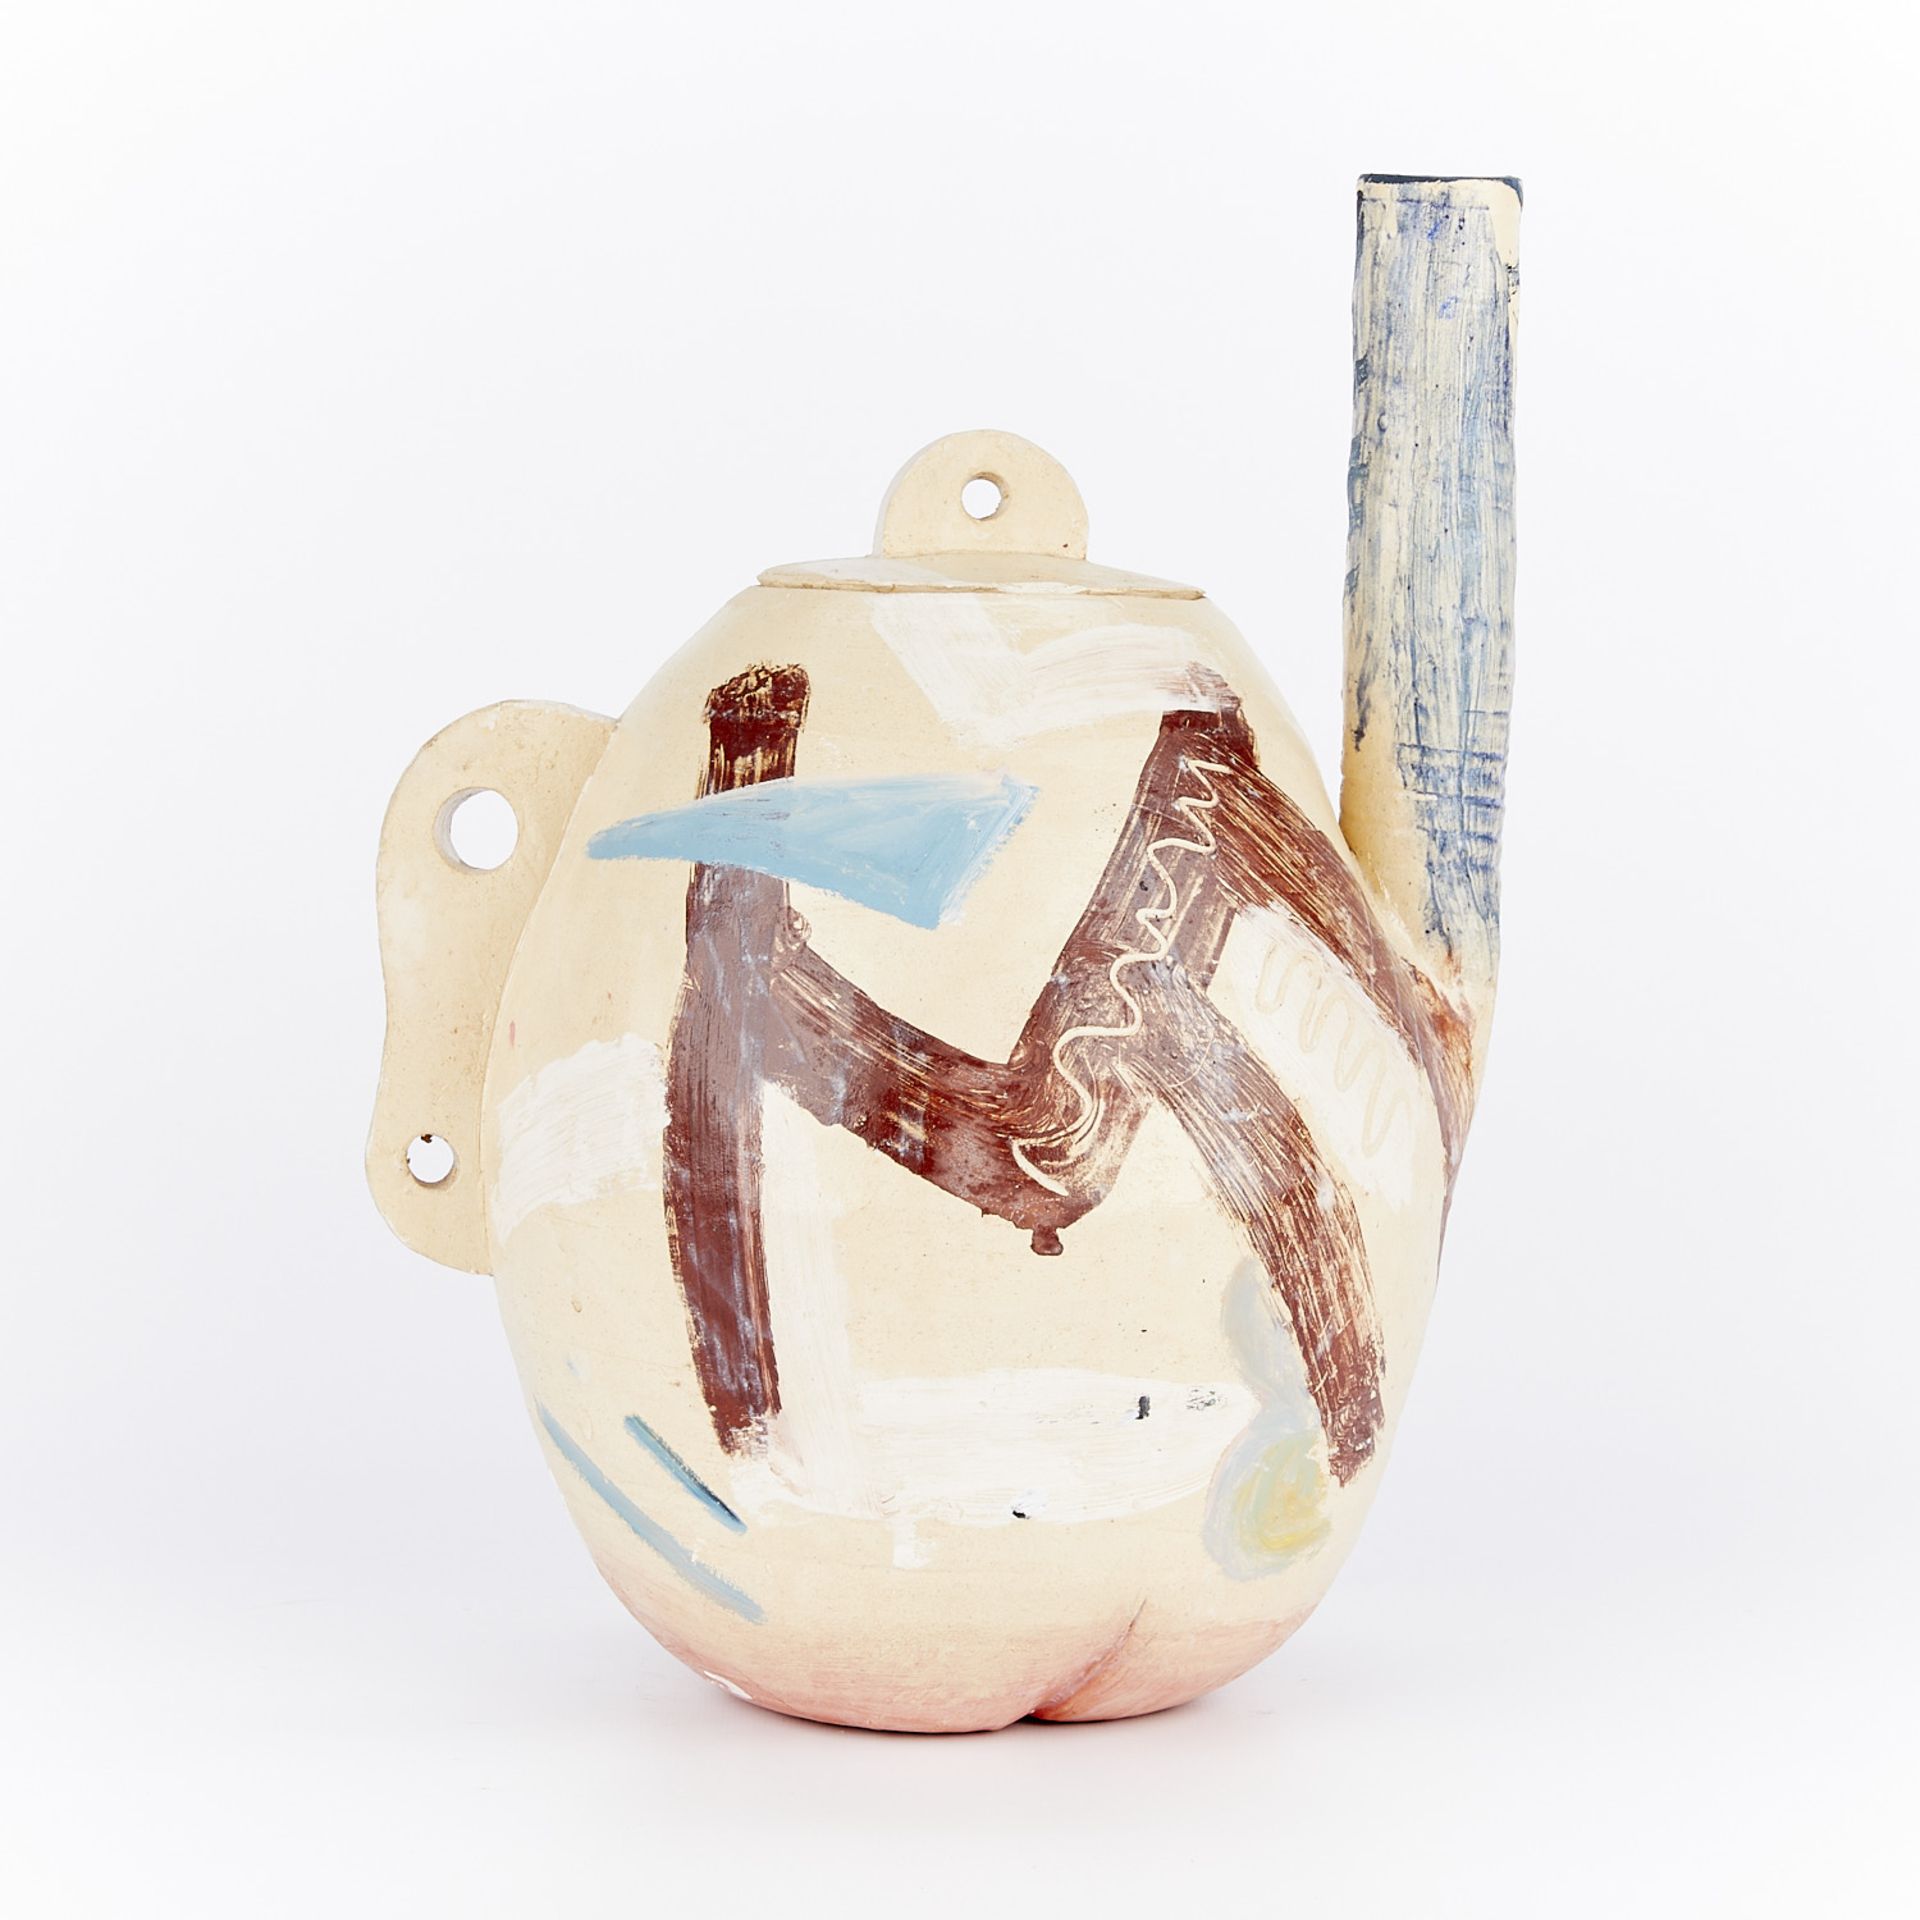 Laure Prouvost "Steaming For You" Painted Ceramic - Image 4 of 12